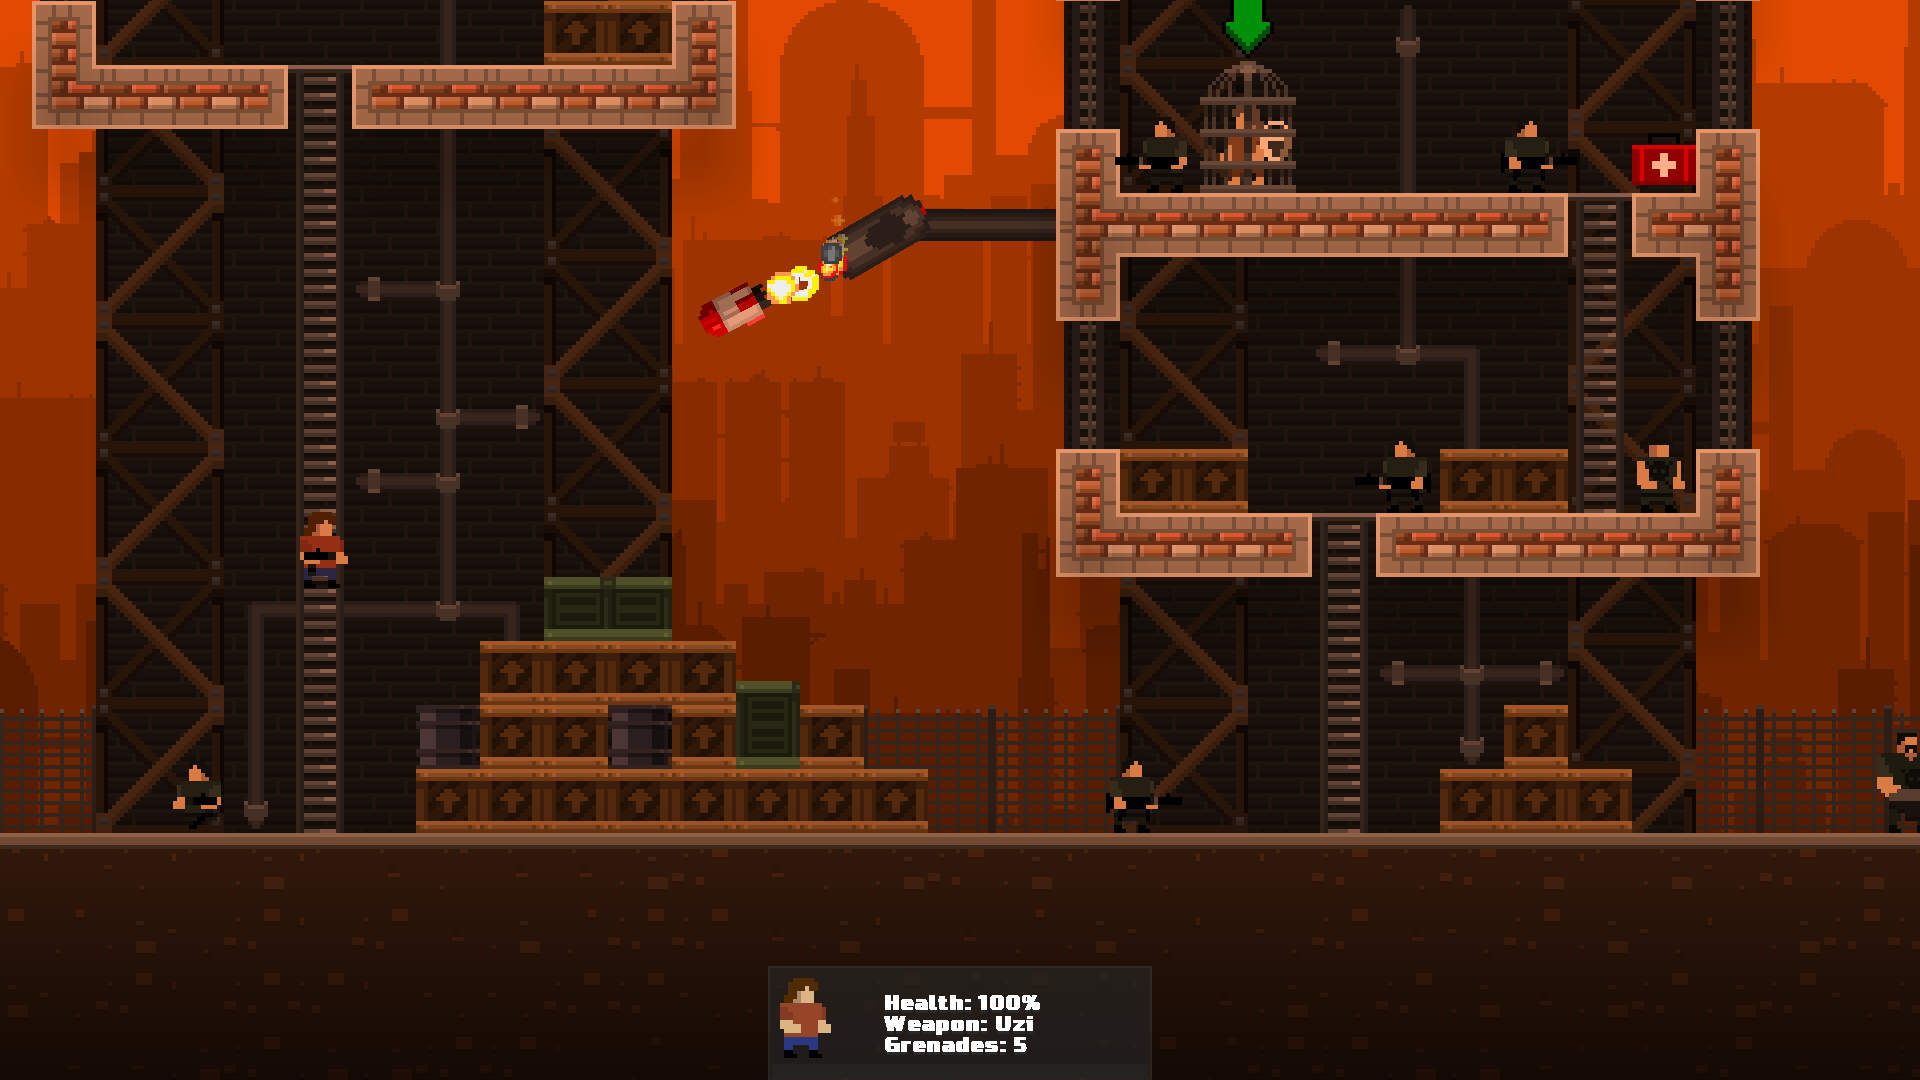 Awesome prison level with rockets.